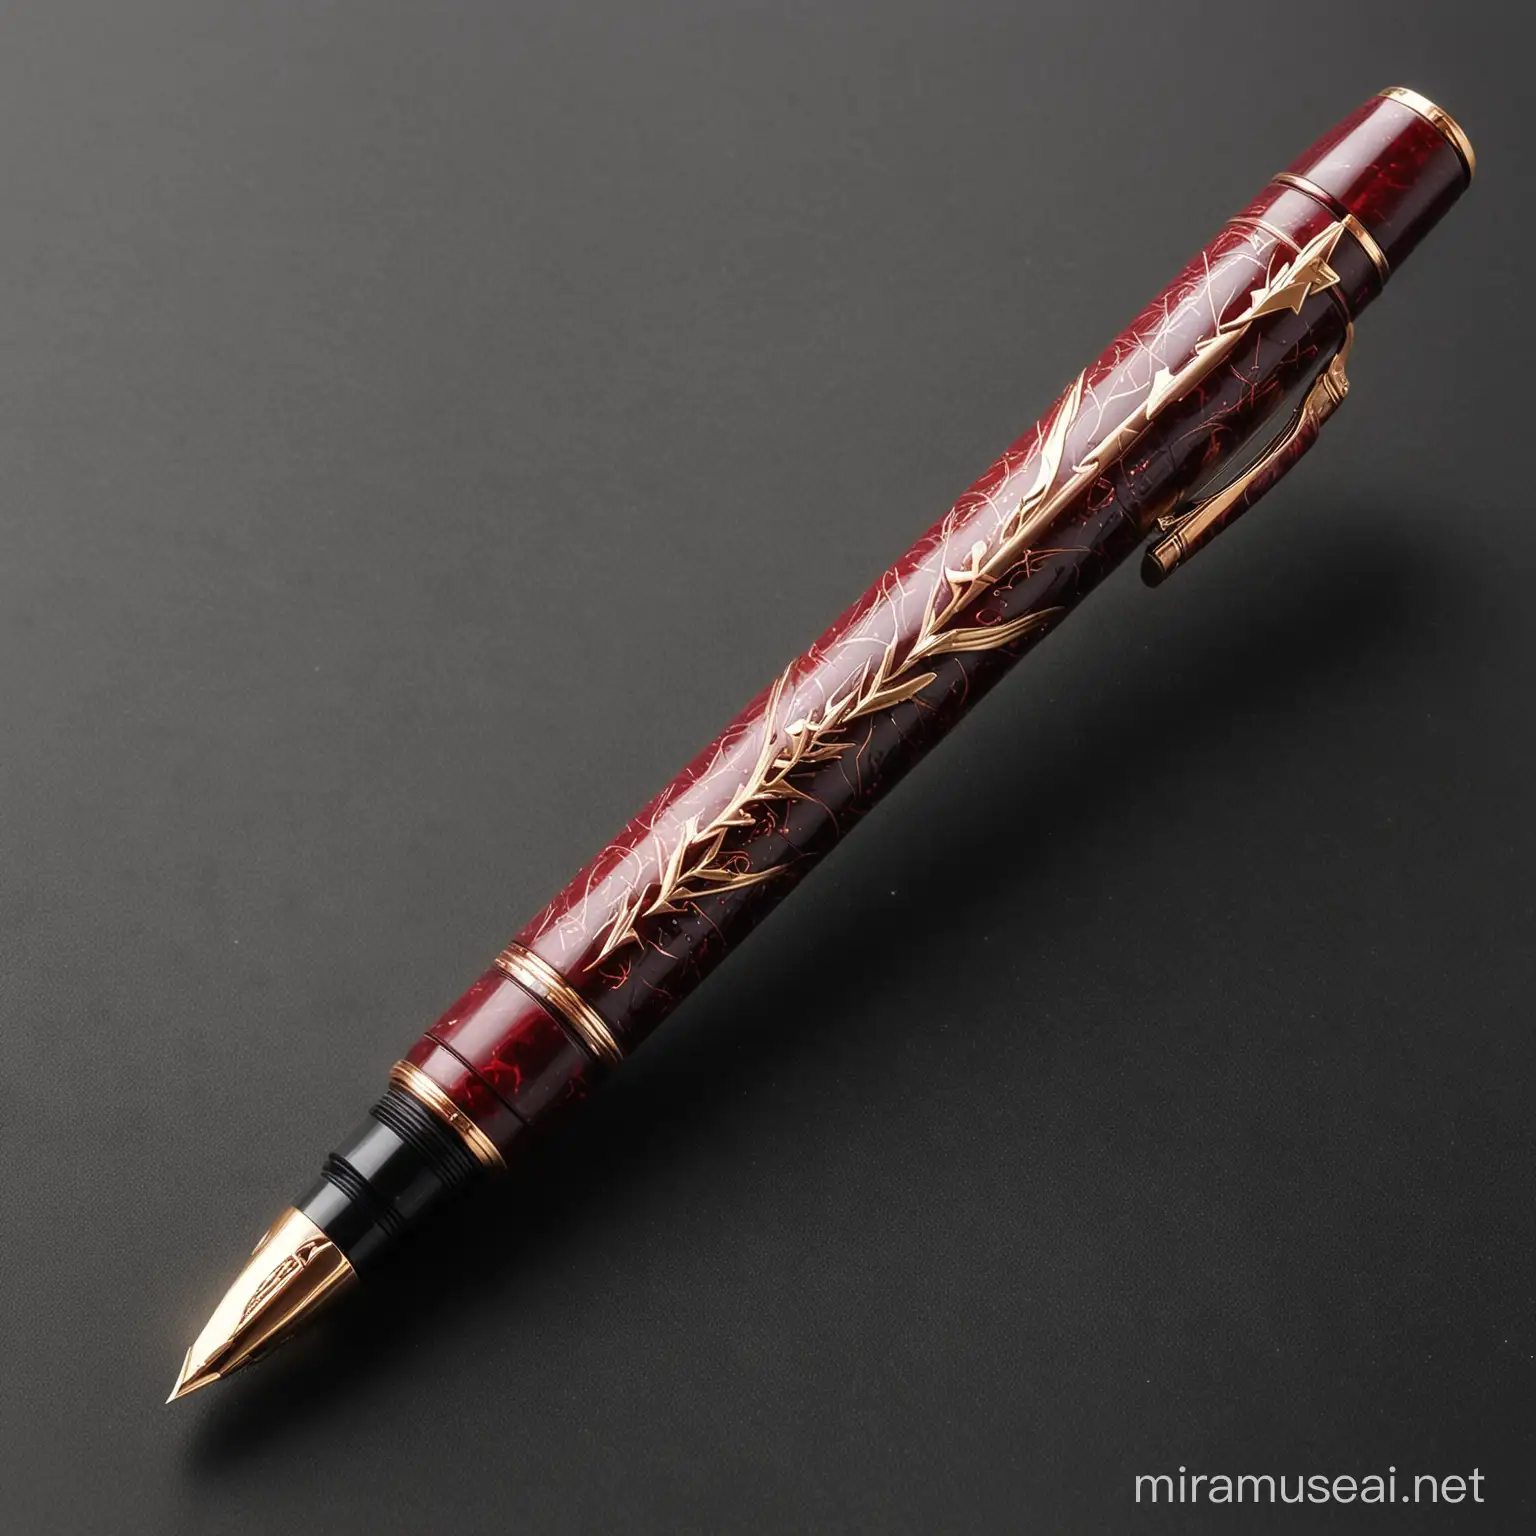 Elegant Fountain Pen with The Flash Style Design